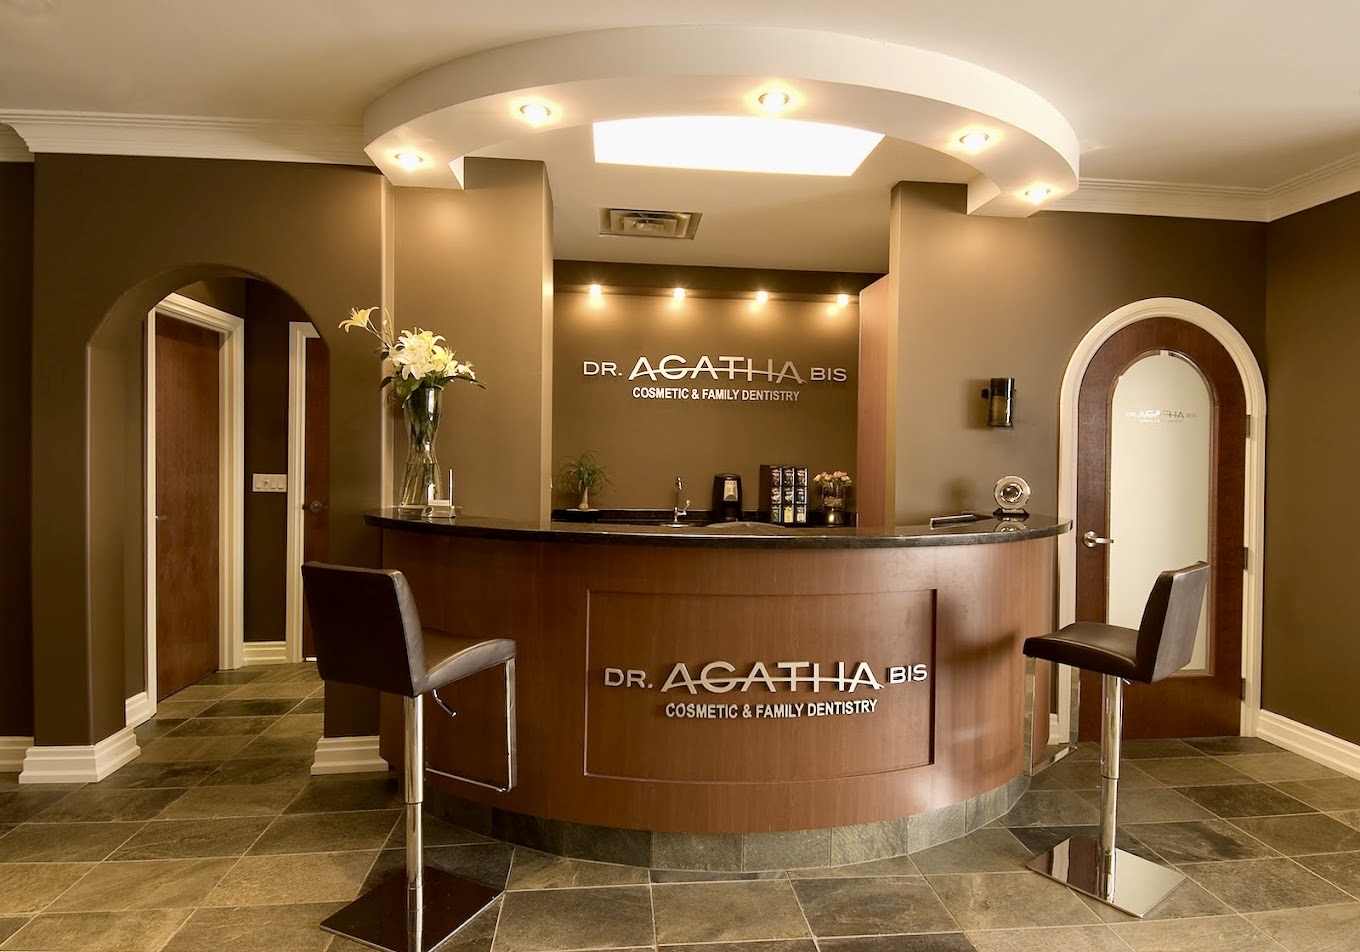 Customized reception room of DR Agatha bis